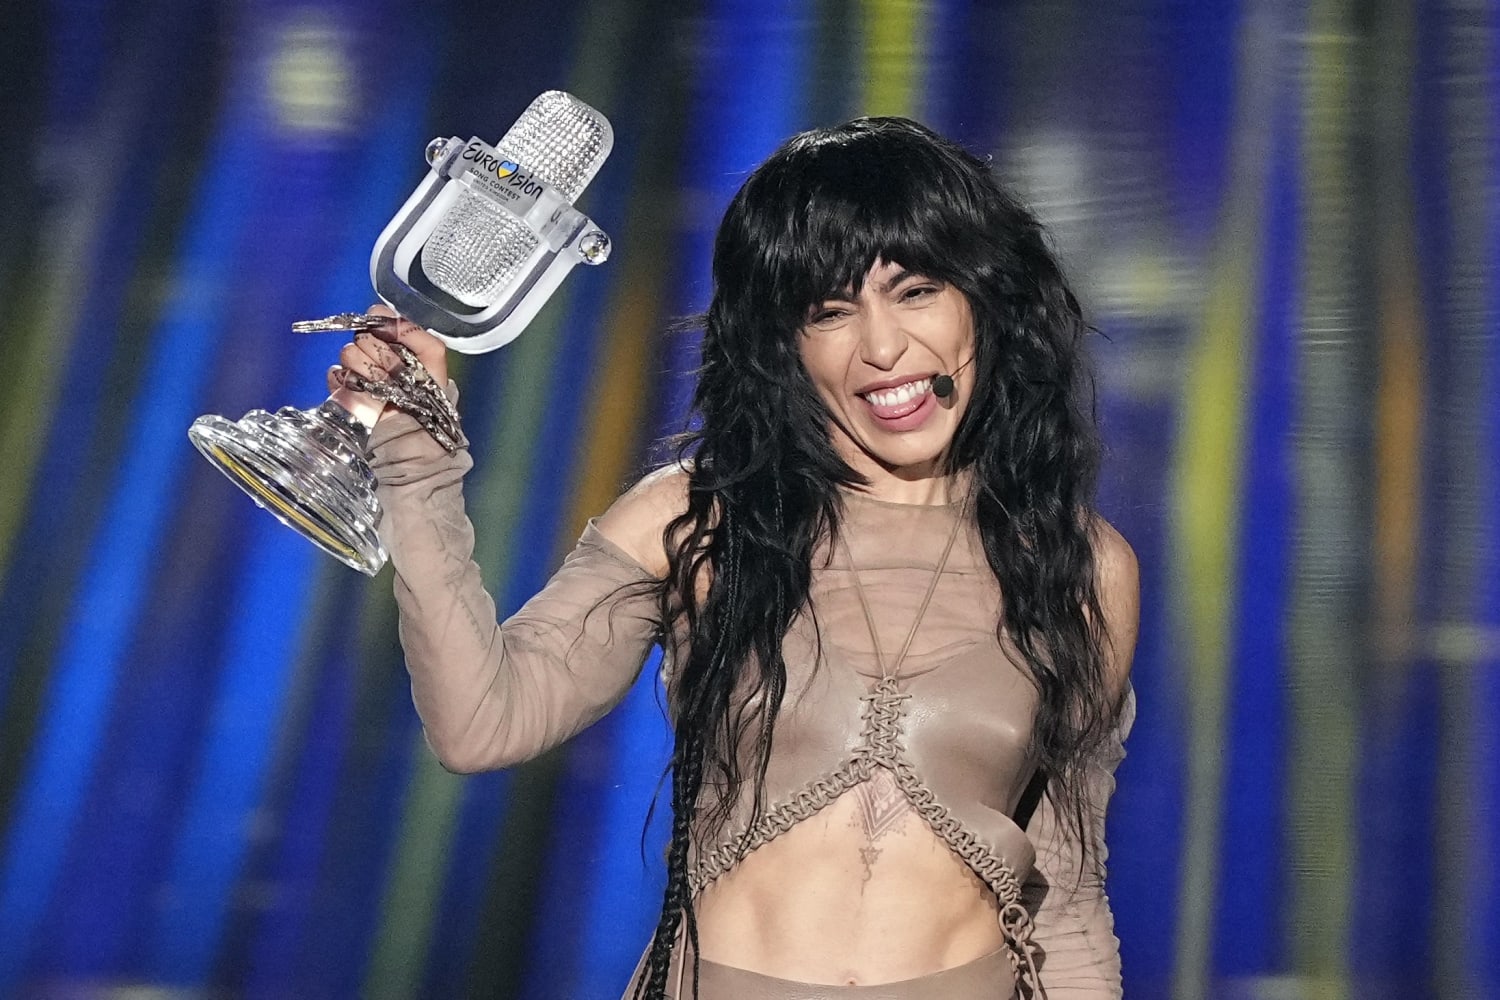 Loren Eurowizja Swedish singer Loreen wins Eurovision Song Contest for a 2nd time